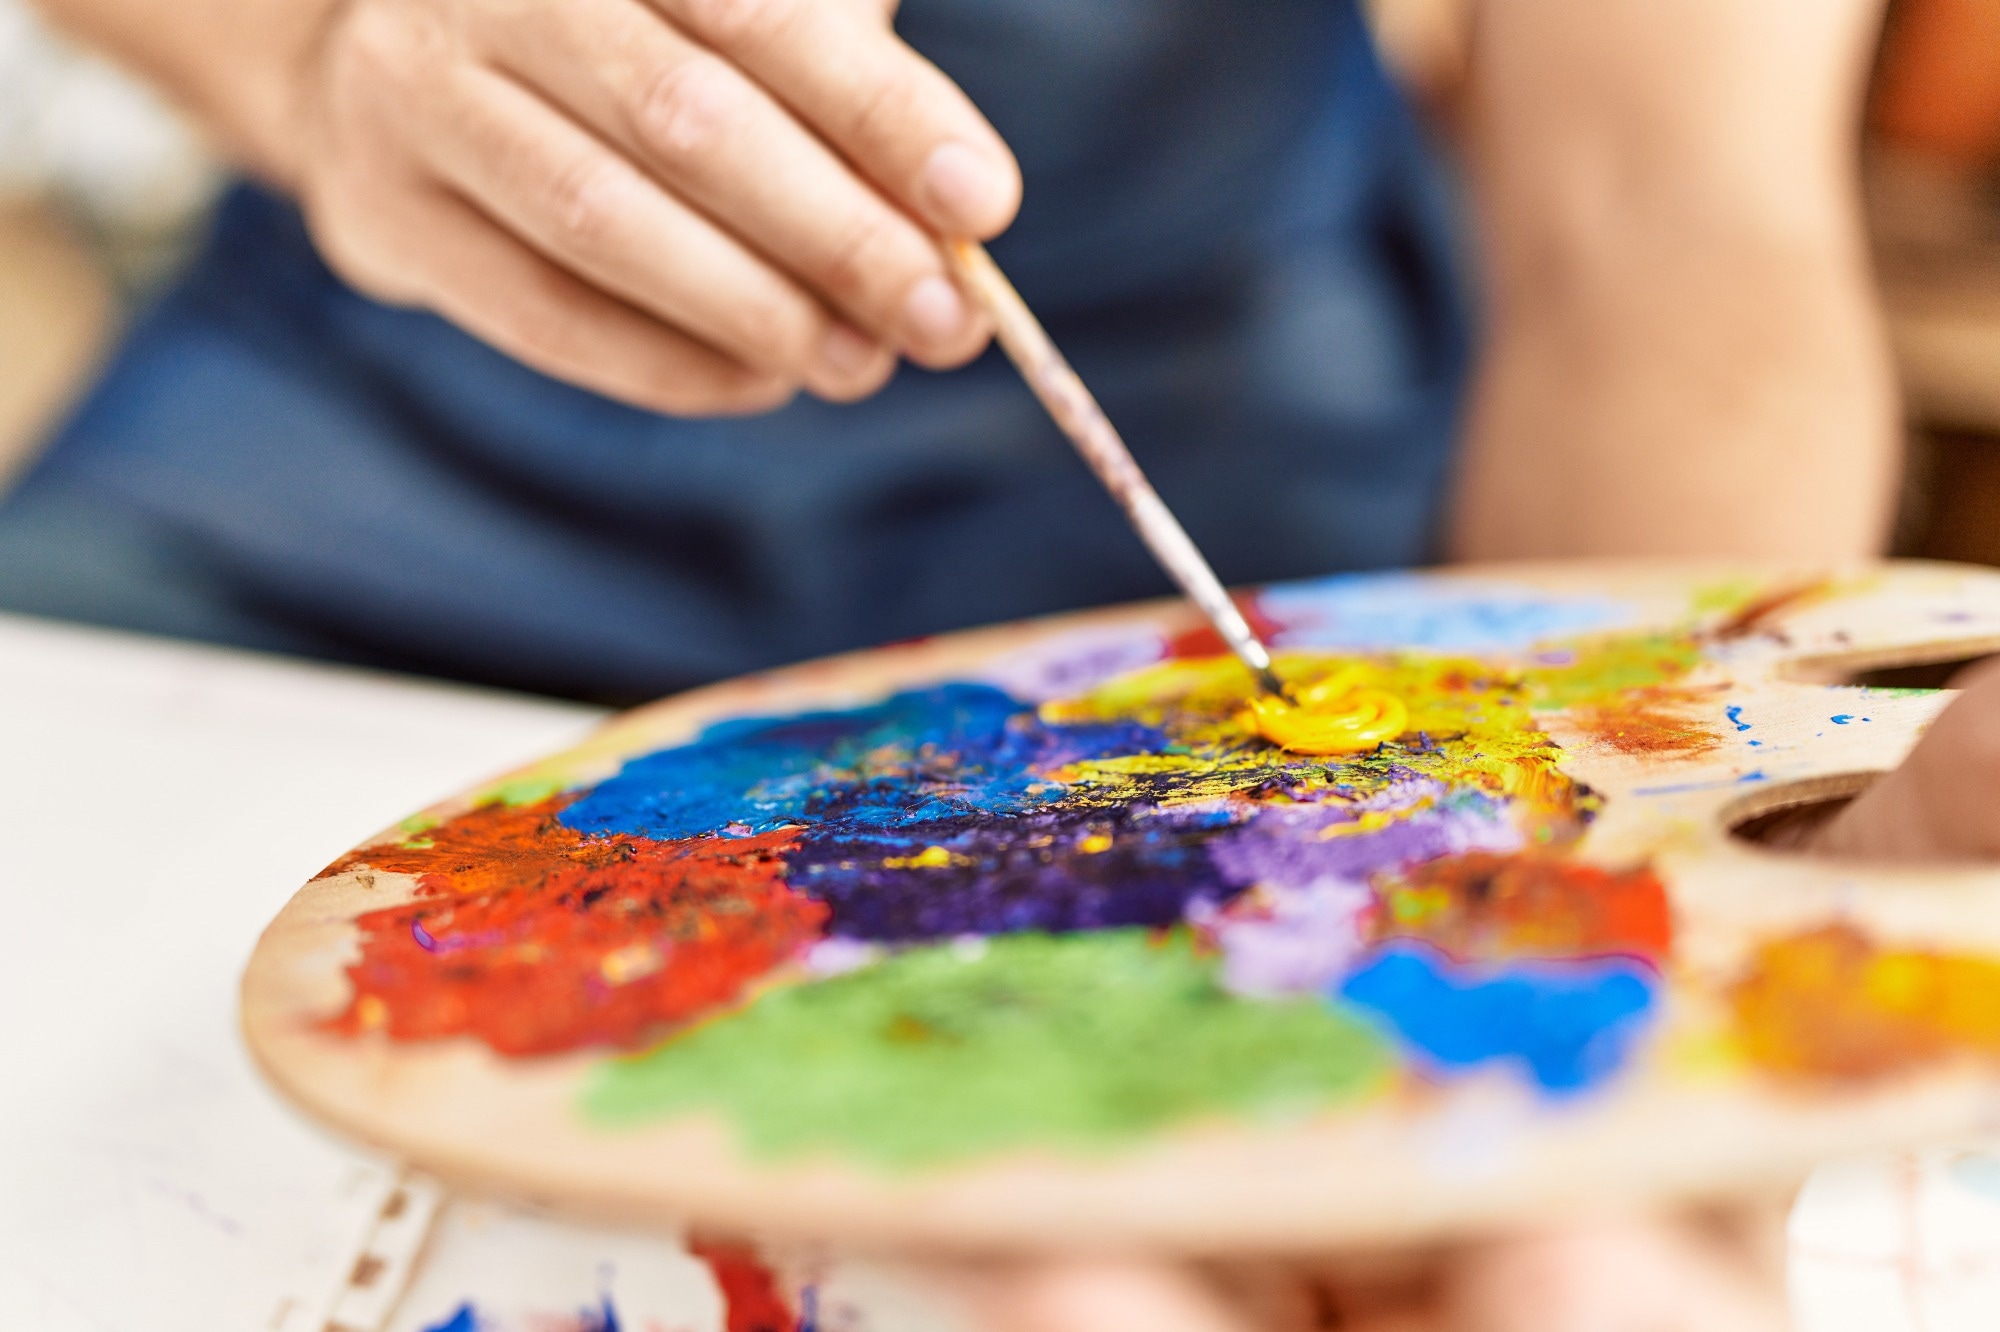 Study: Arts and creativity interventions for improving health and wellbeing in older adults: a systematic literature review of economic evaluation studies. Image Credit: Krakenimages.com / Shutterstock.com